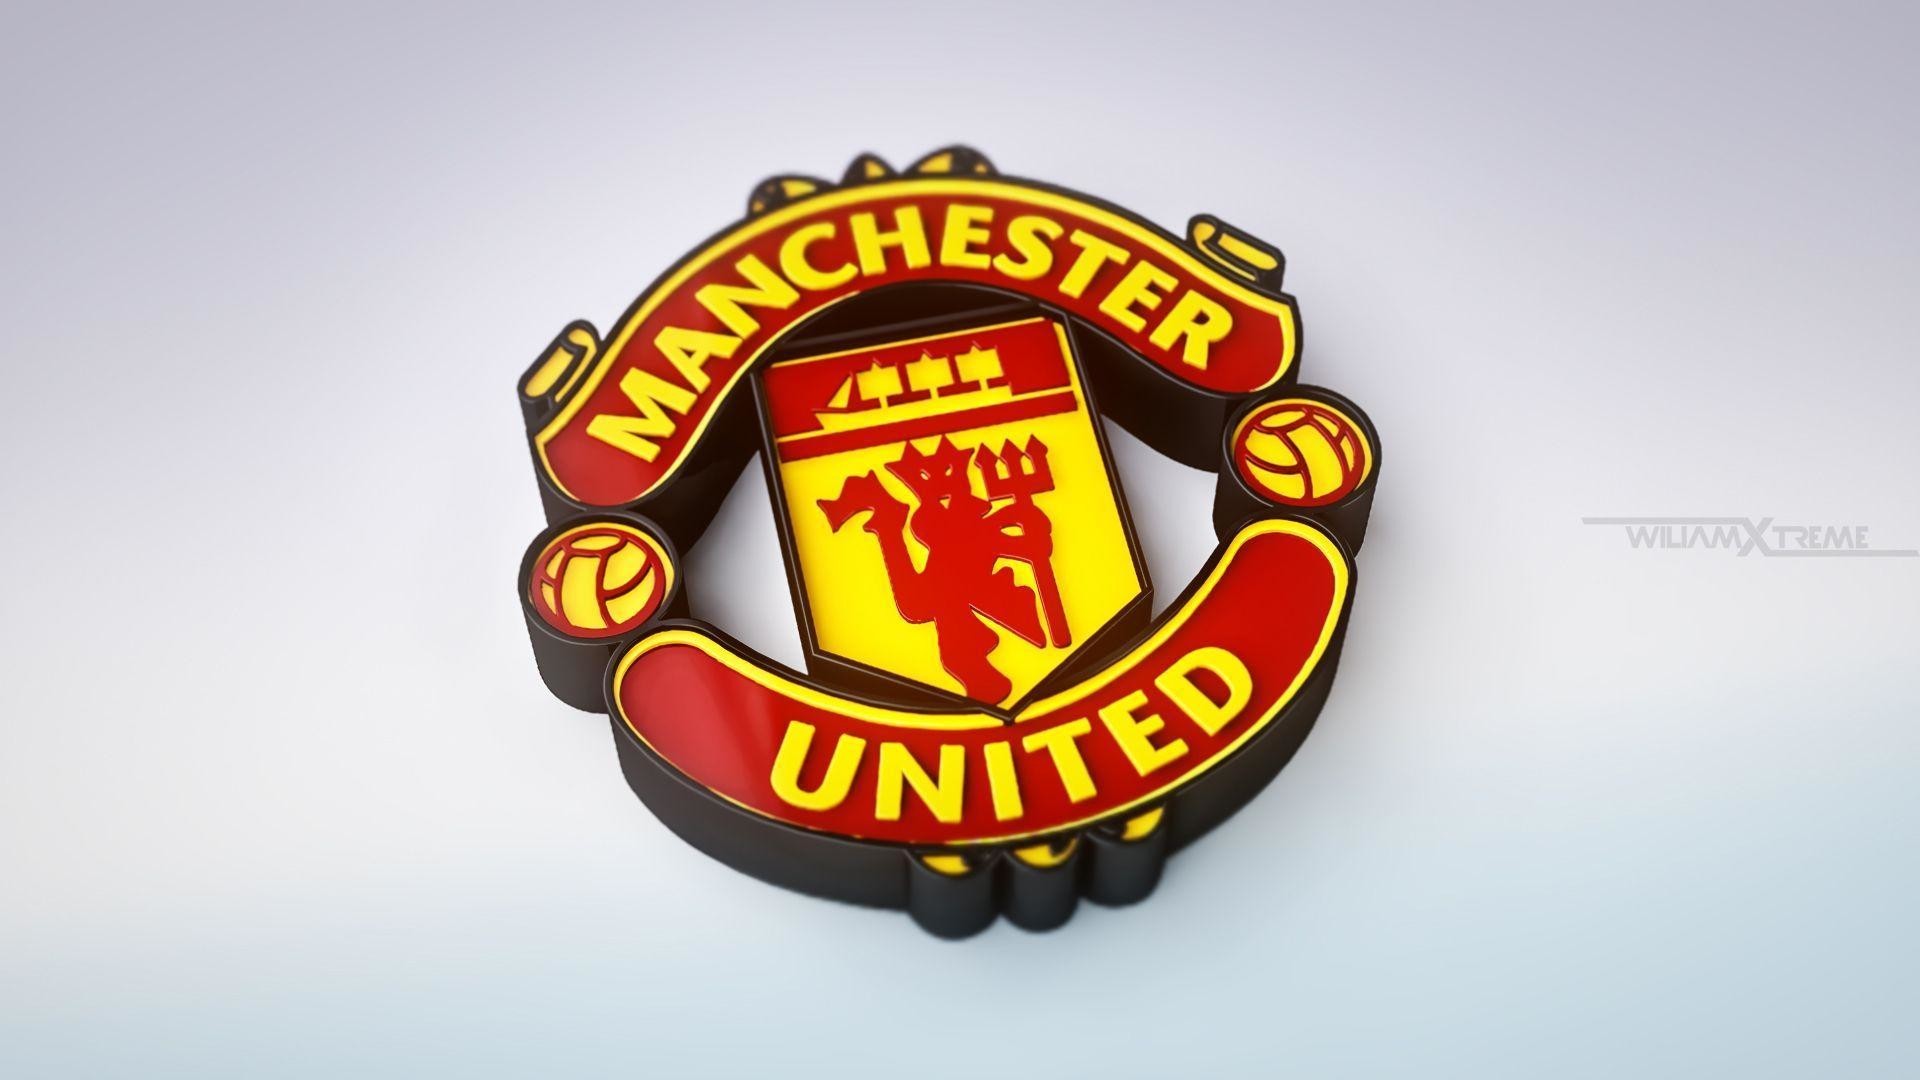 hinh nen manchester united 43 - wallpaper free download